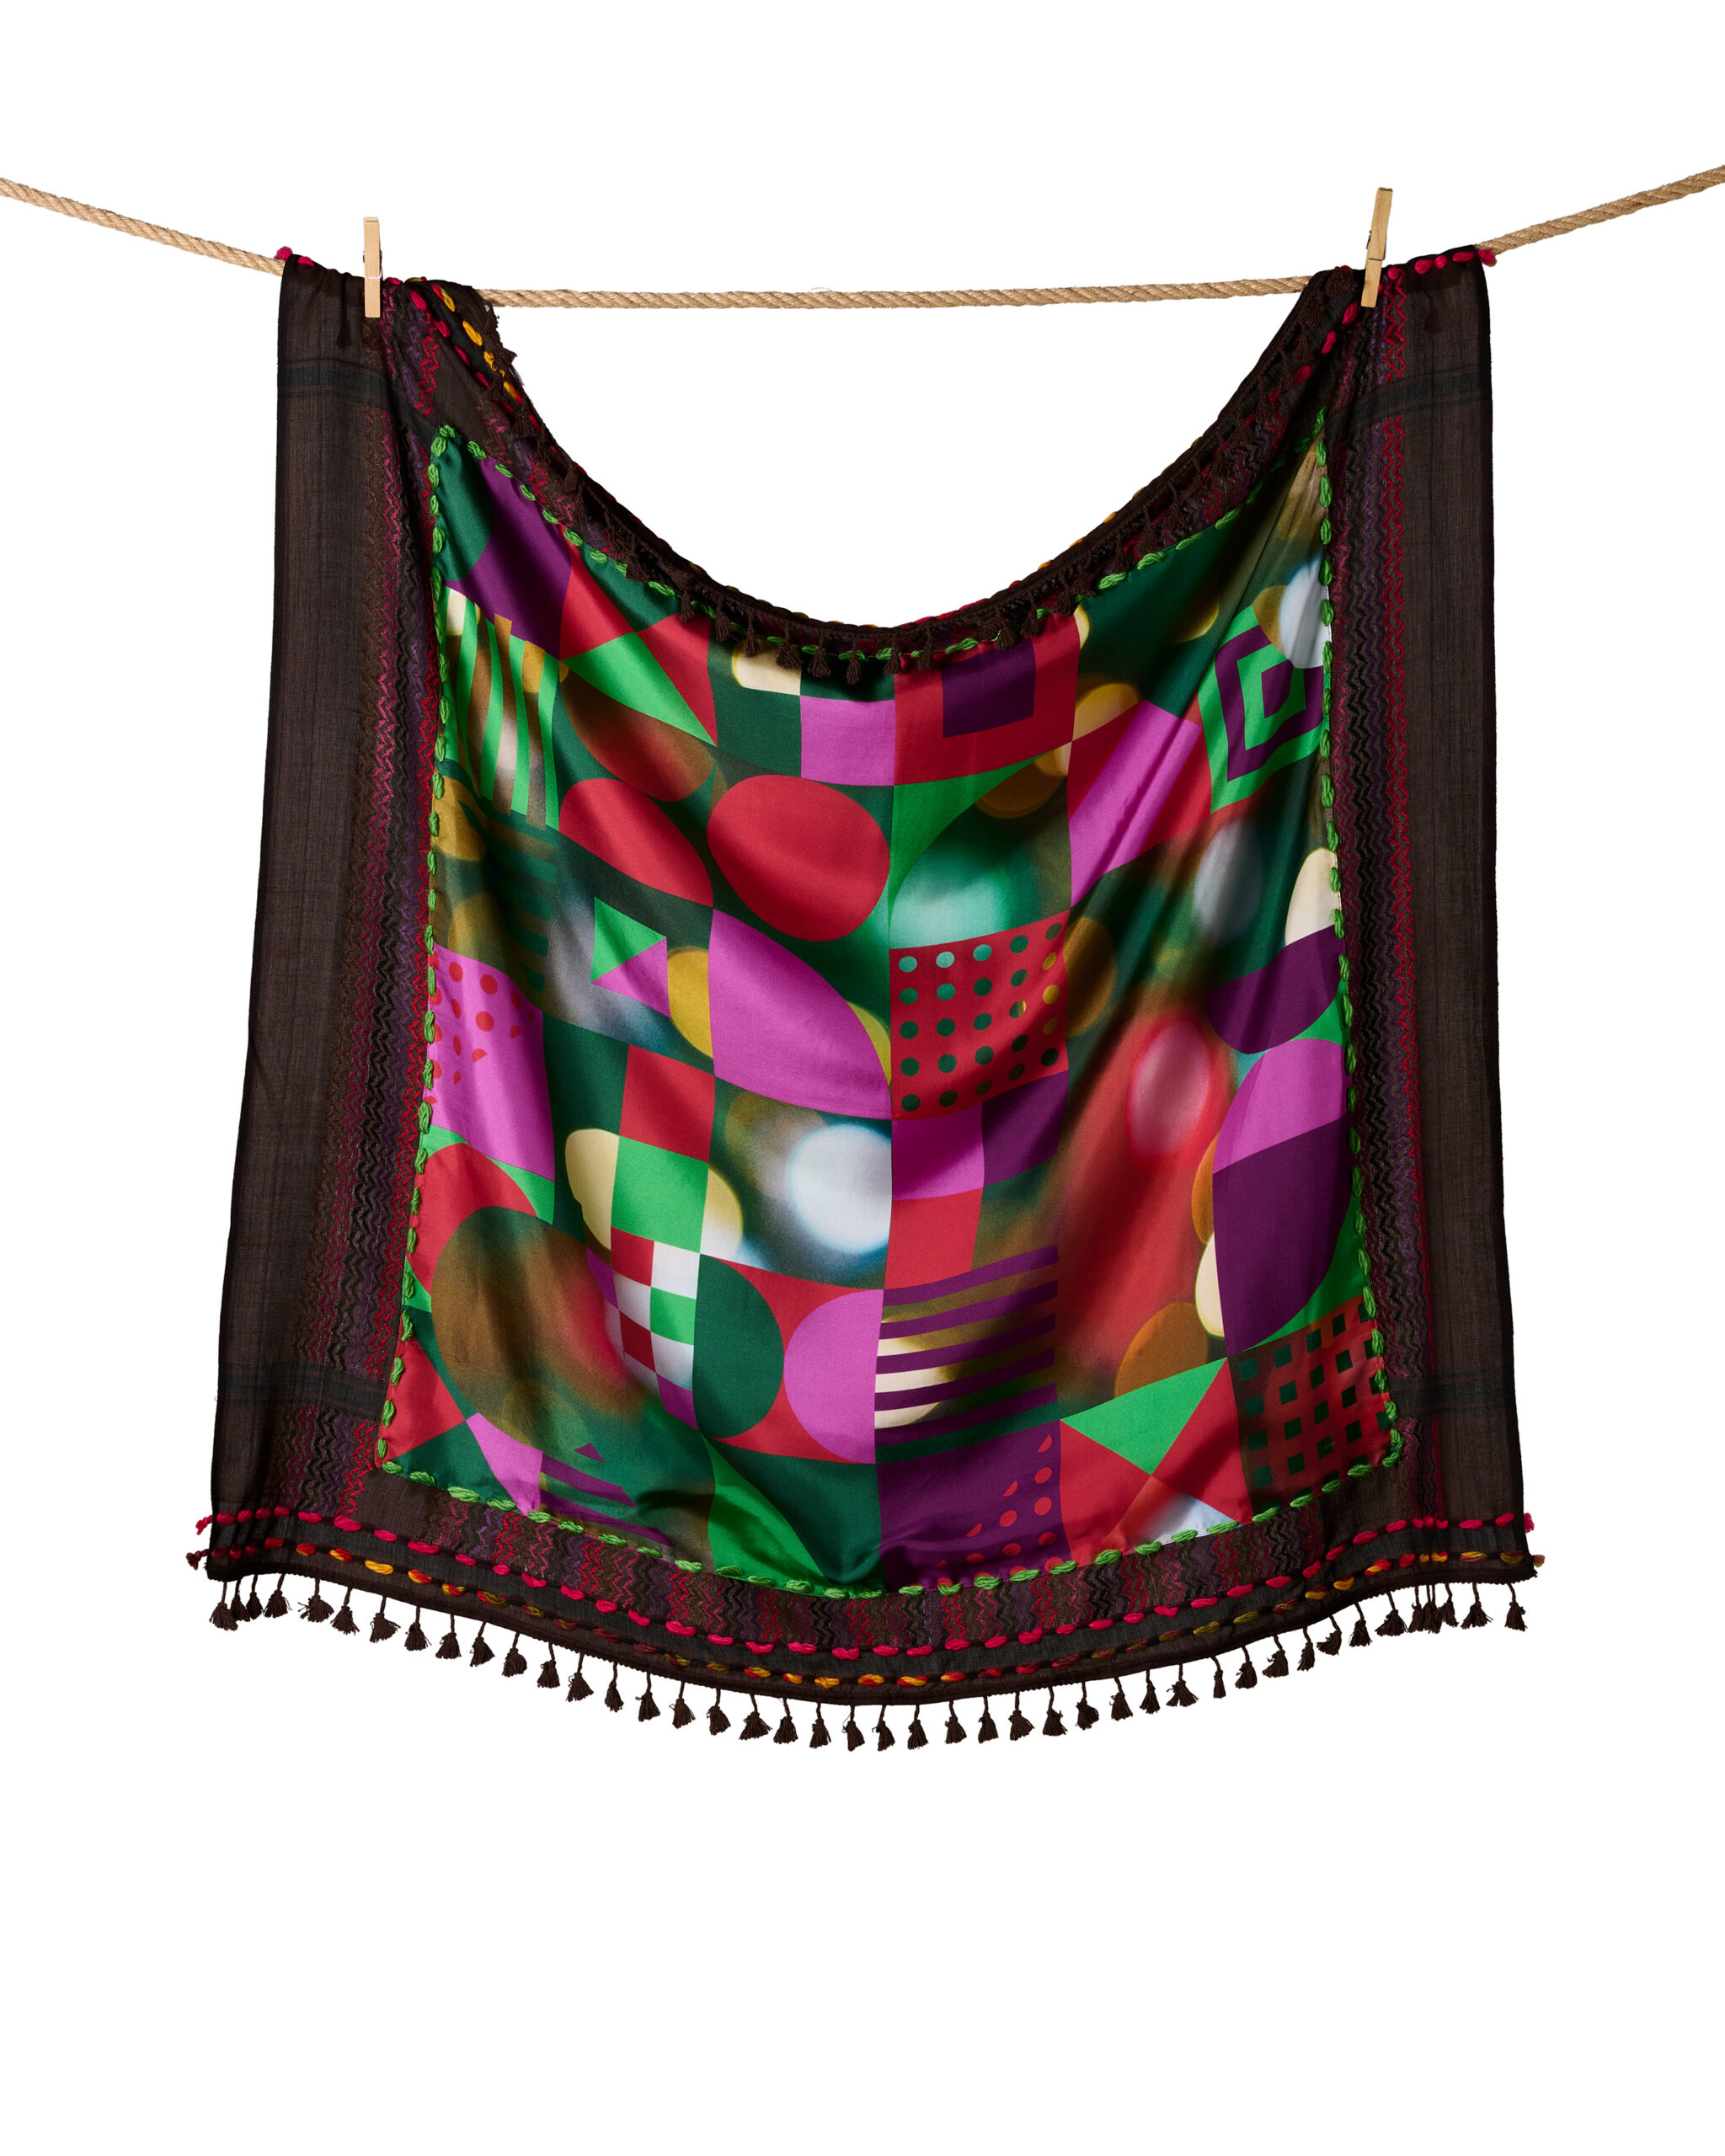 brown multicolr keffiyeh doubled with silk scarf “holidays lights” motive